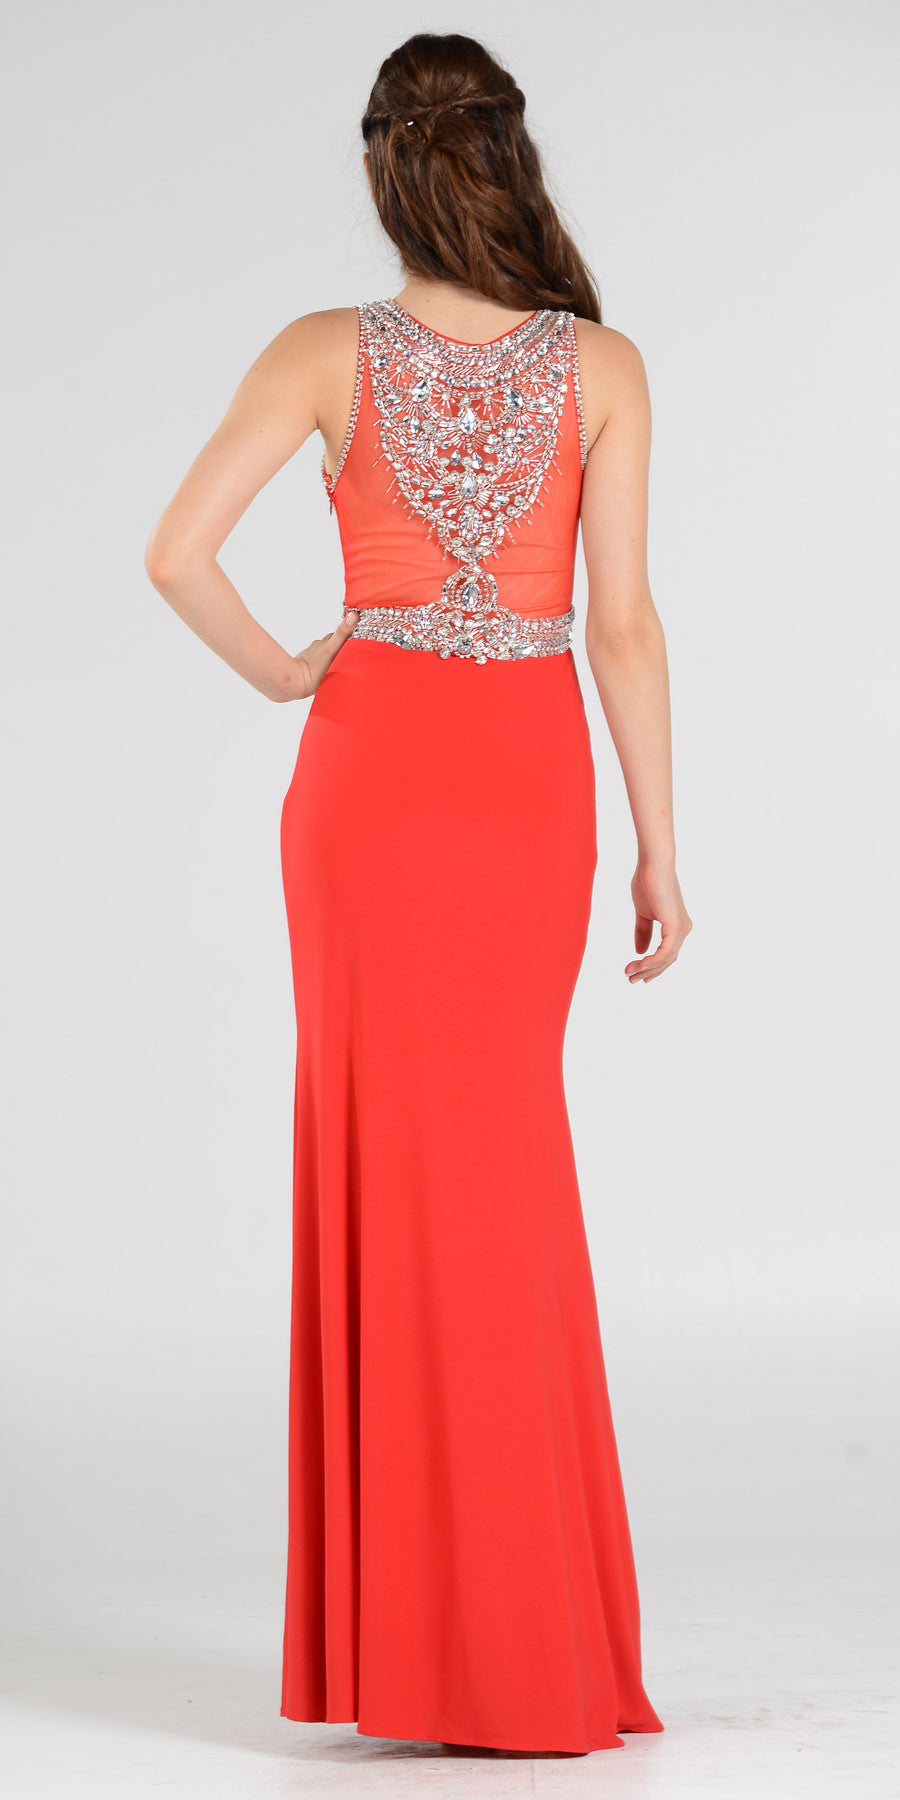 Poly USA 7192 Full Length Sexy Prom Gown Red Sheath